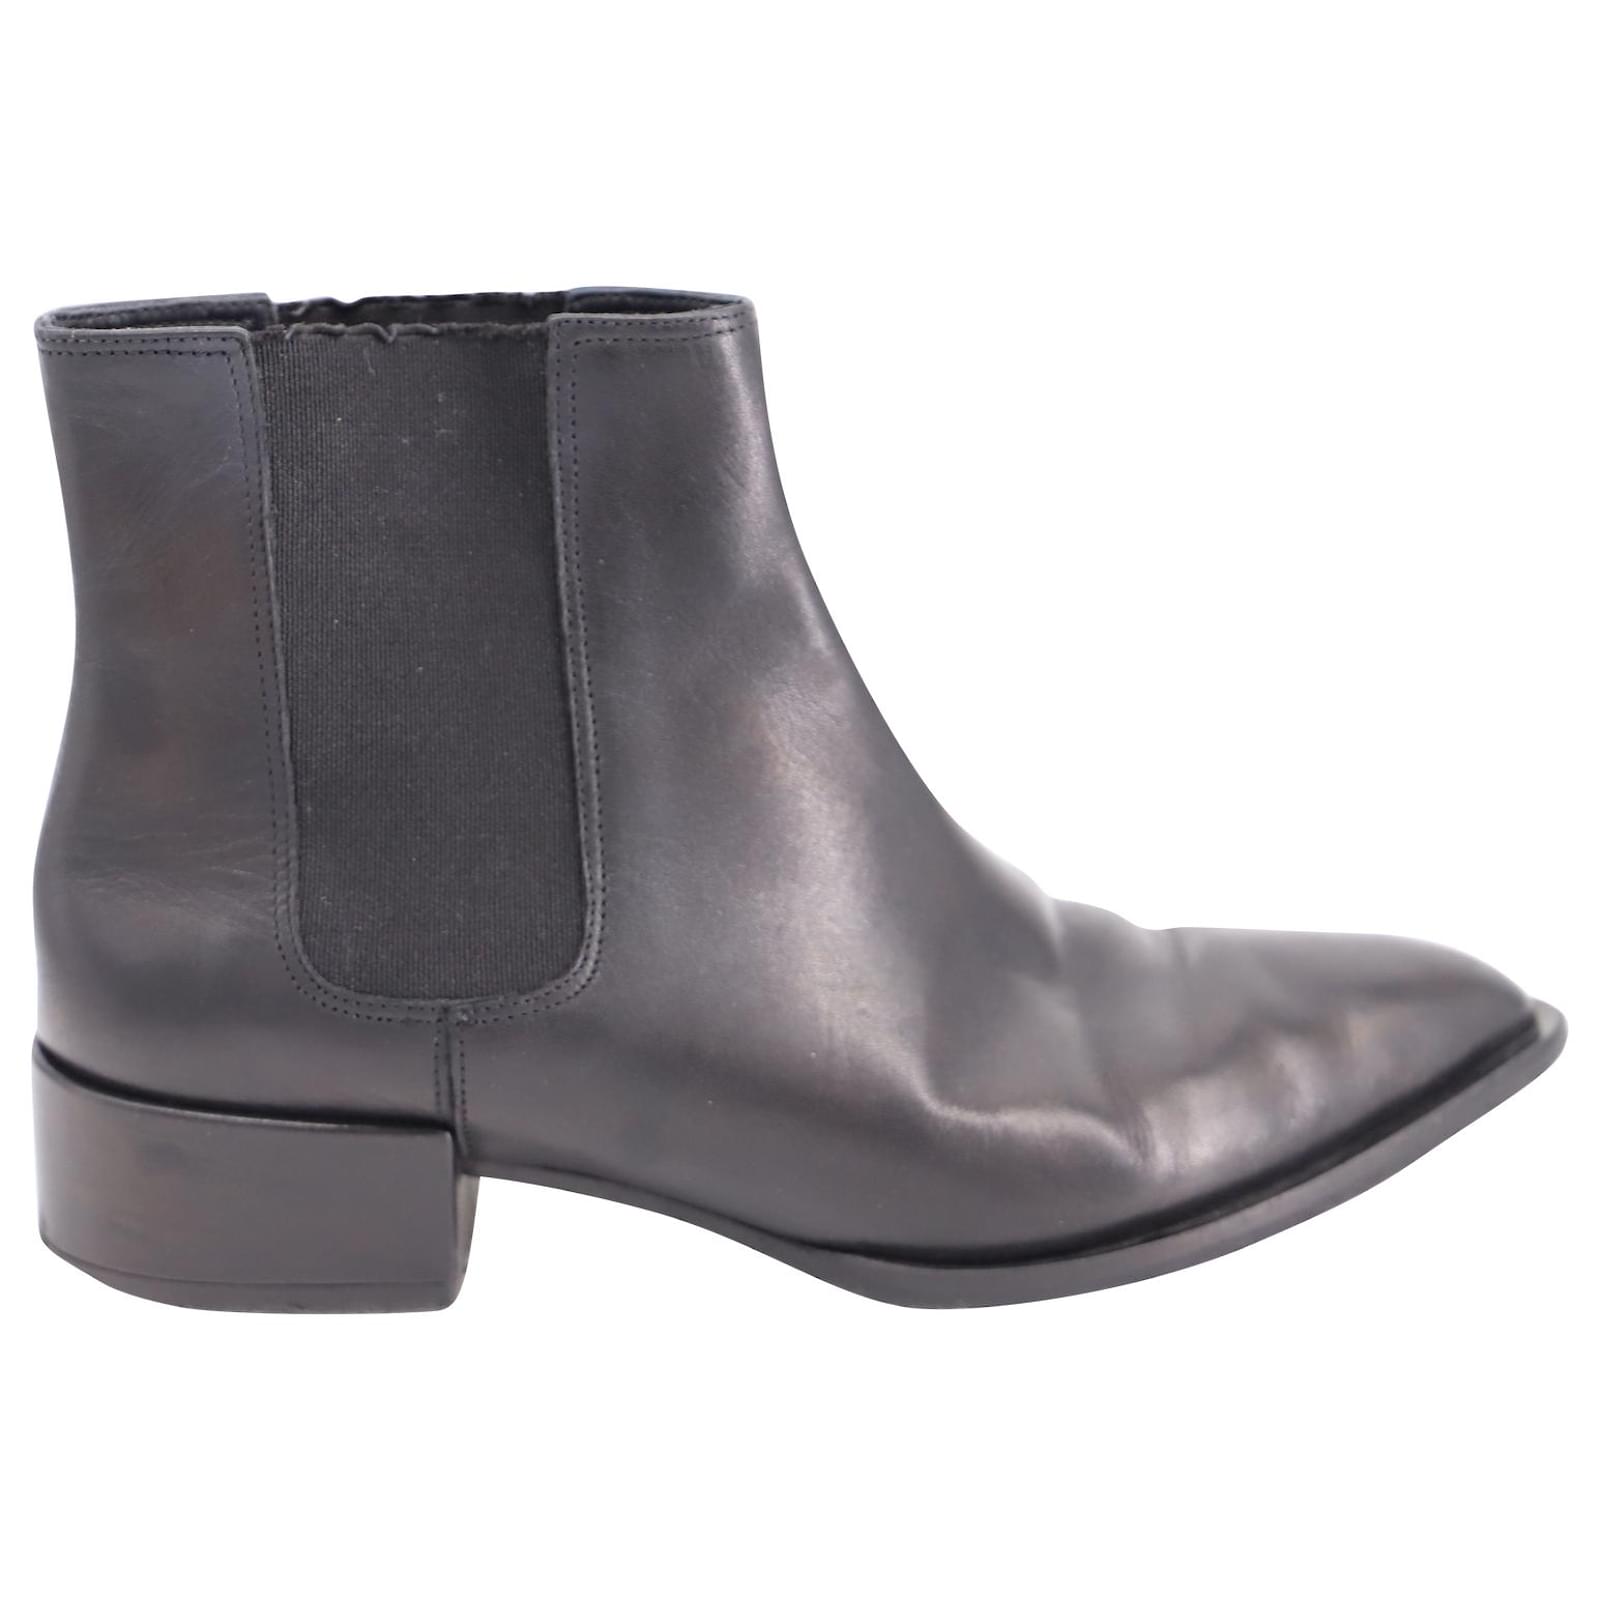 vince pointed toe low heel ankle boots in black leather